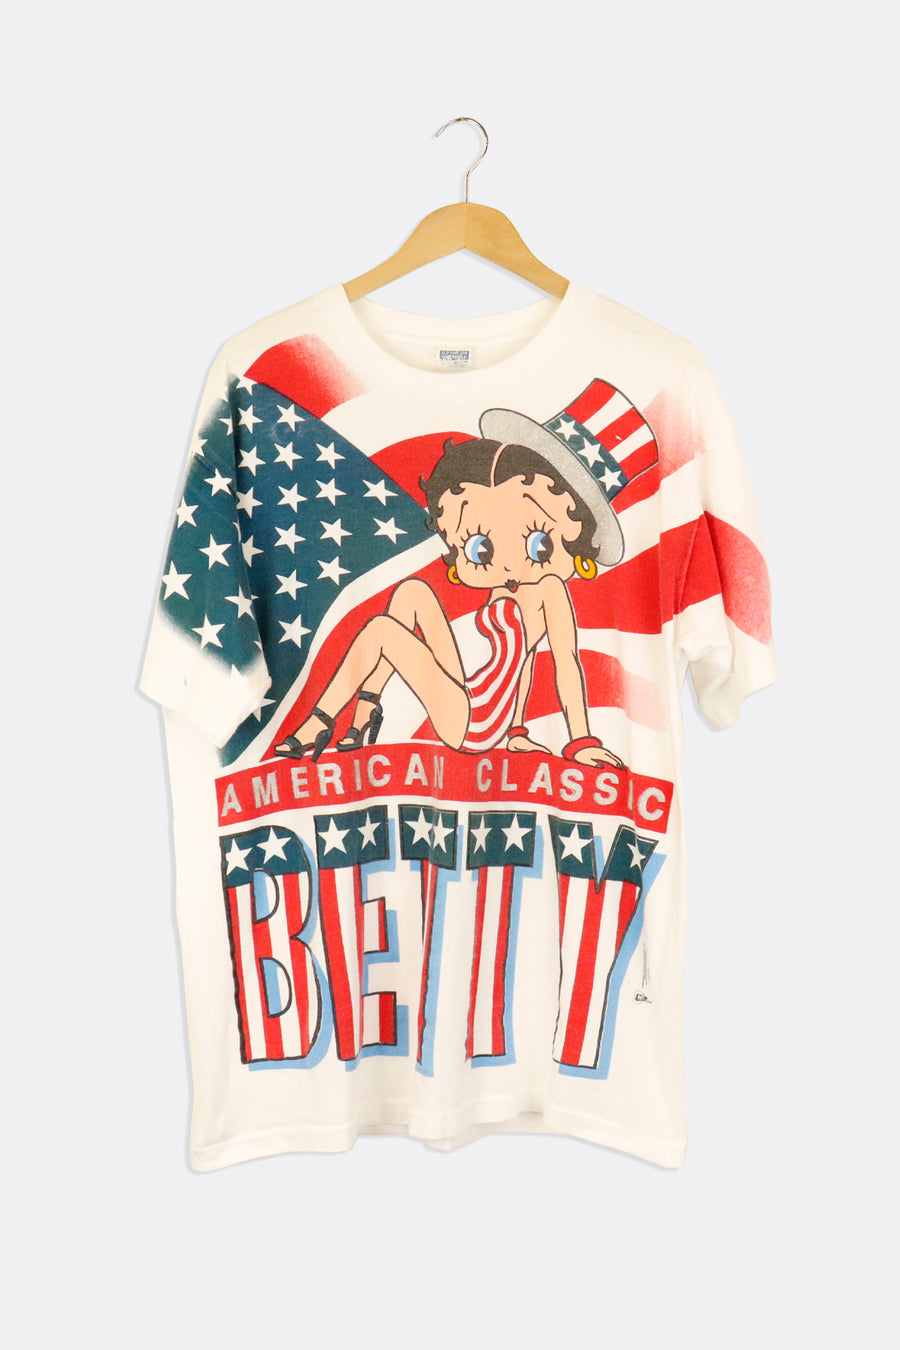 Vintage 1995 American Classic Betty Boop Sparkly Lettering USA Flag Graphic T Shirt Sz XL